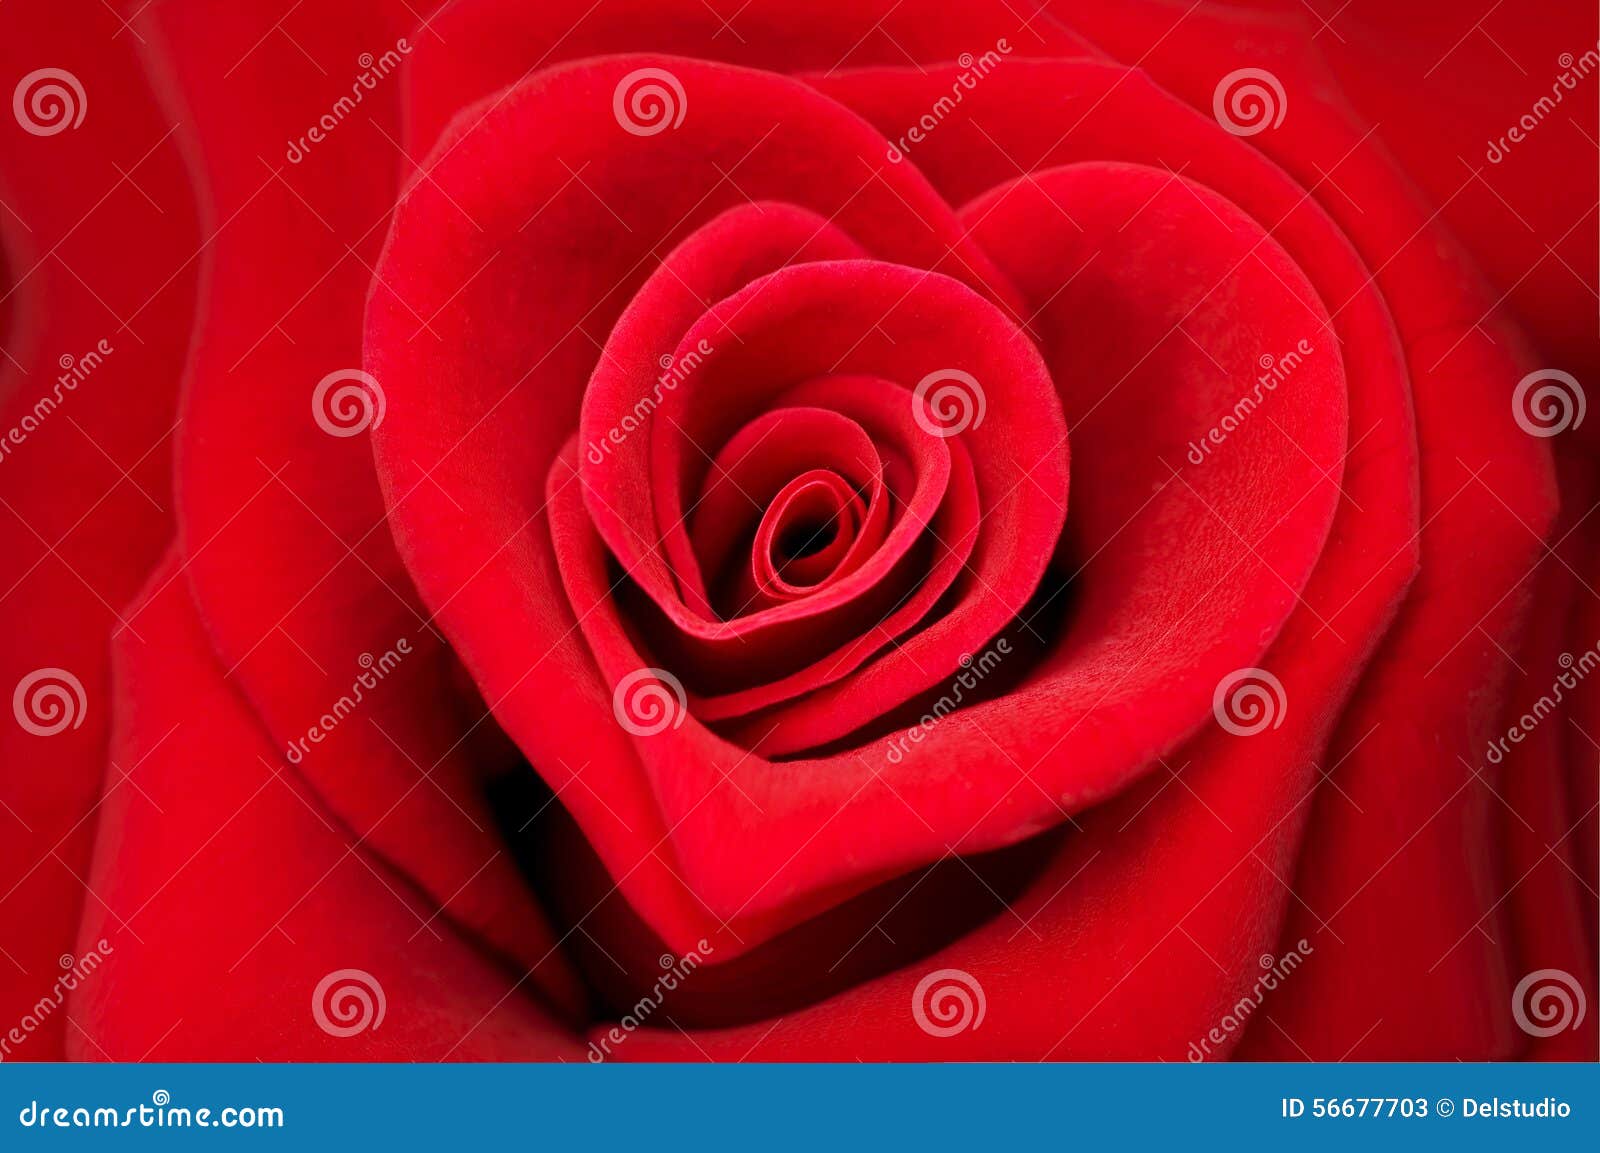 red rose in  of a heart